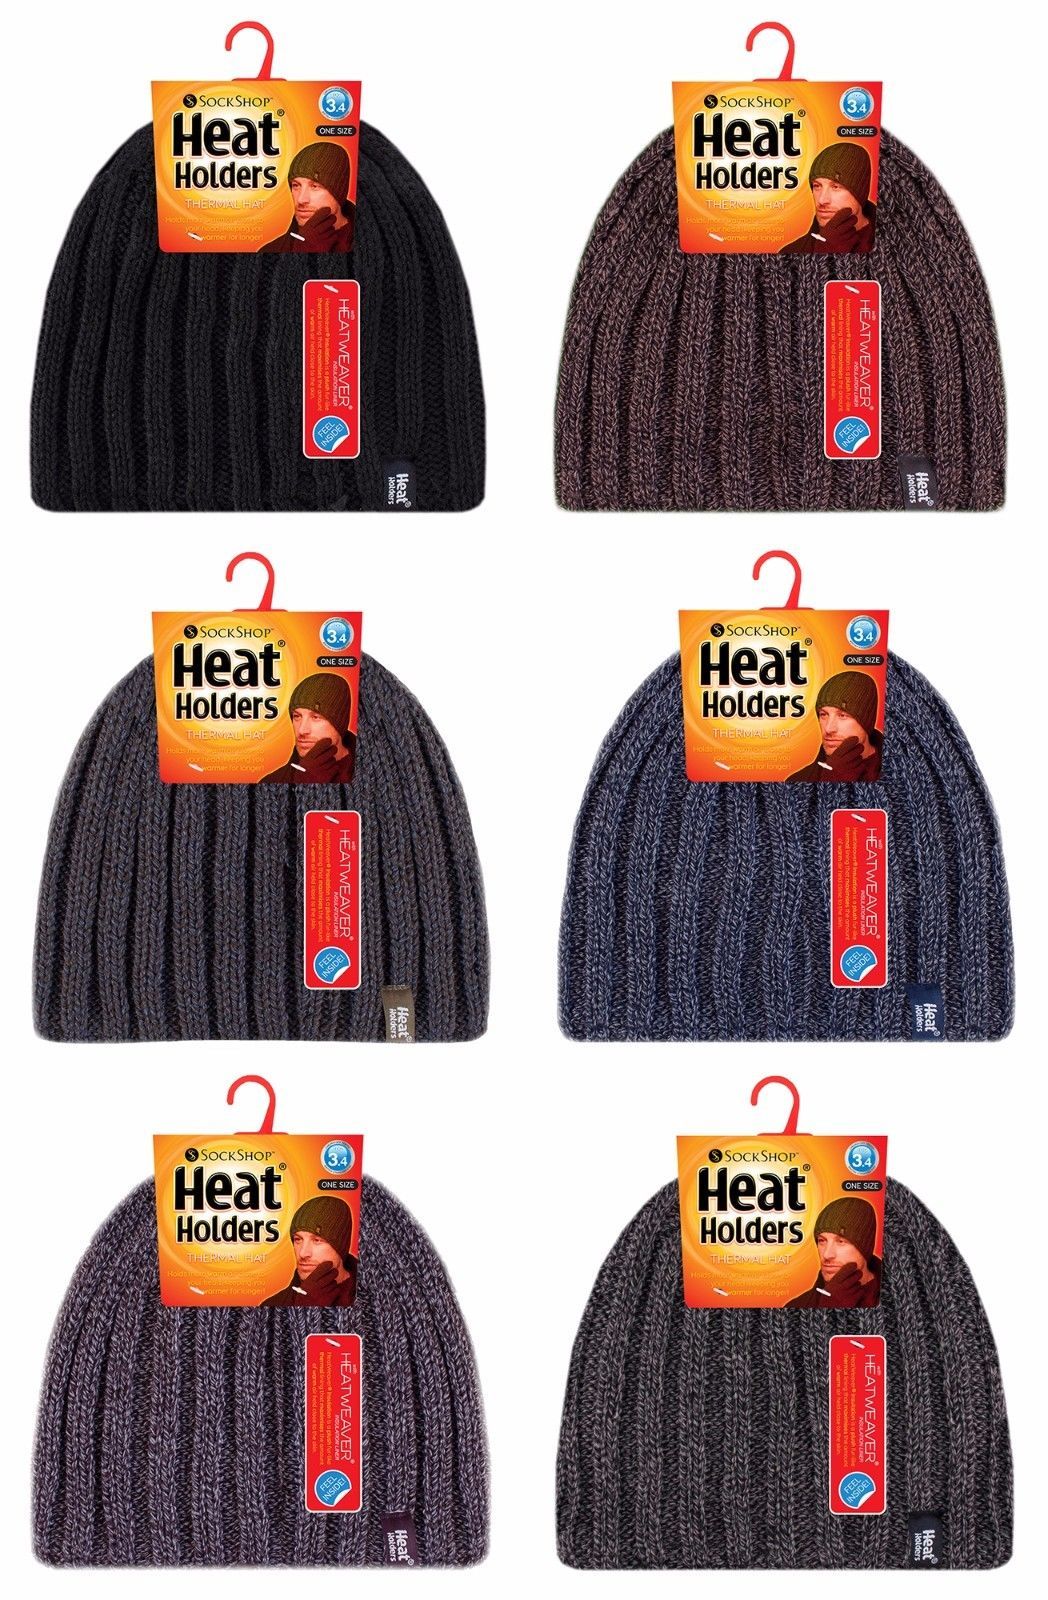 Heat Holders - Mens Warm Fleece Lined Insulated Ribbed Knit Winter Thermal Hat